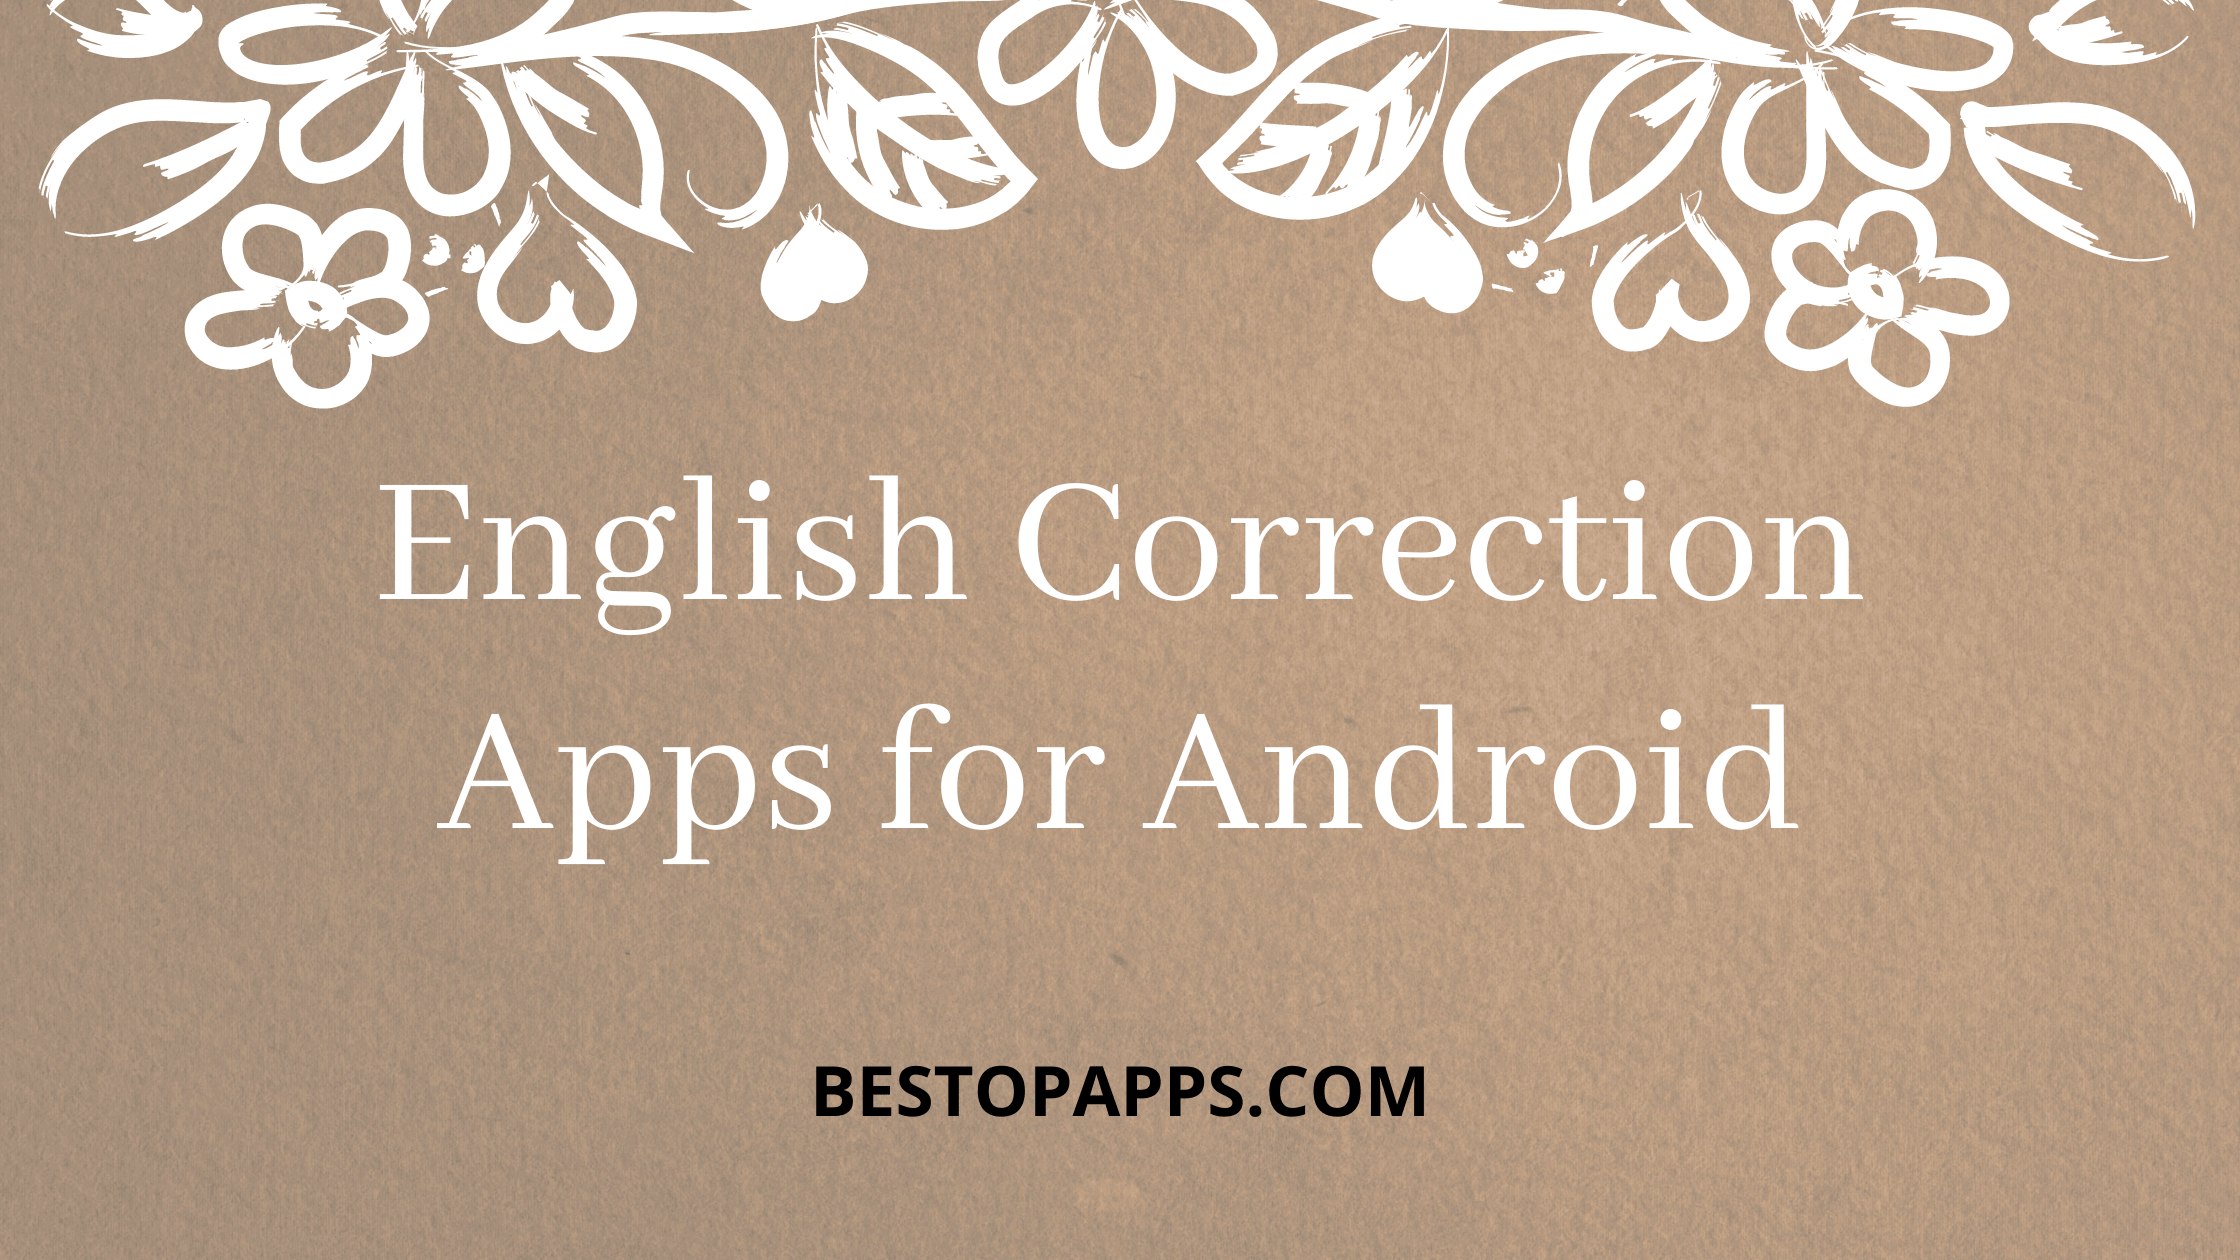 English Correction Apps for Android